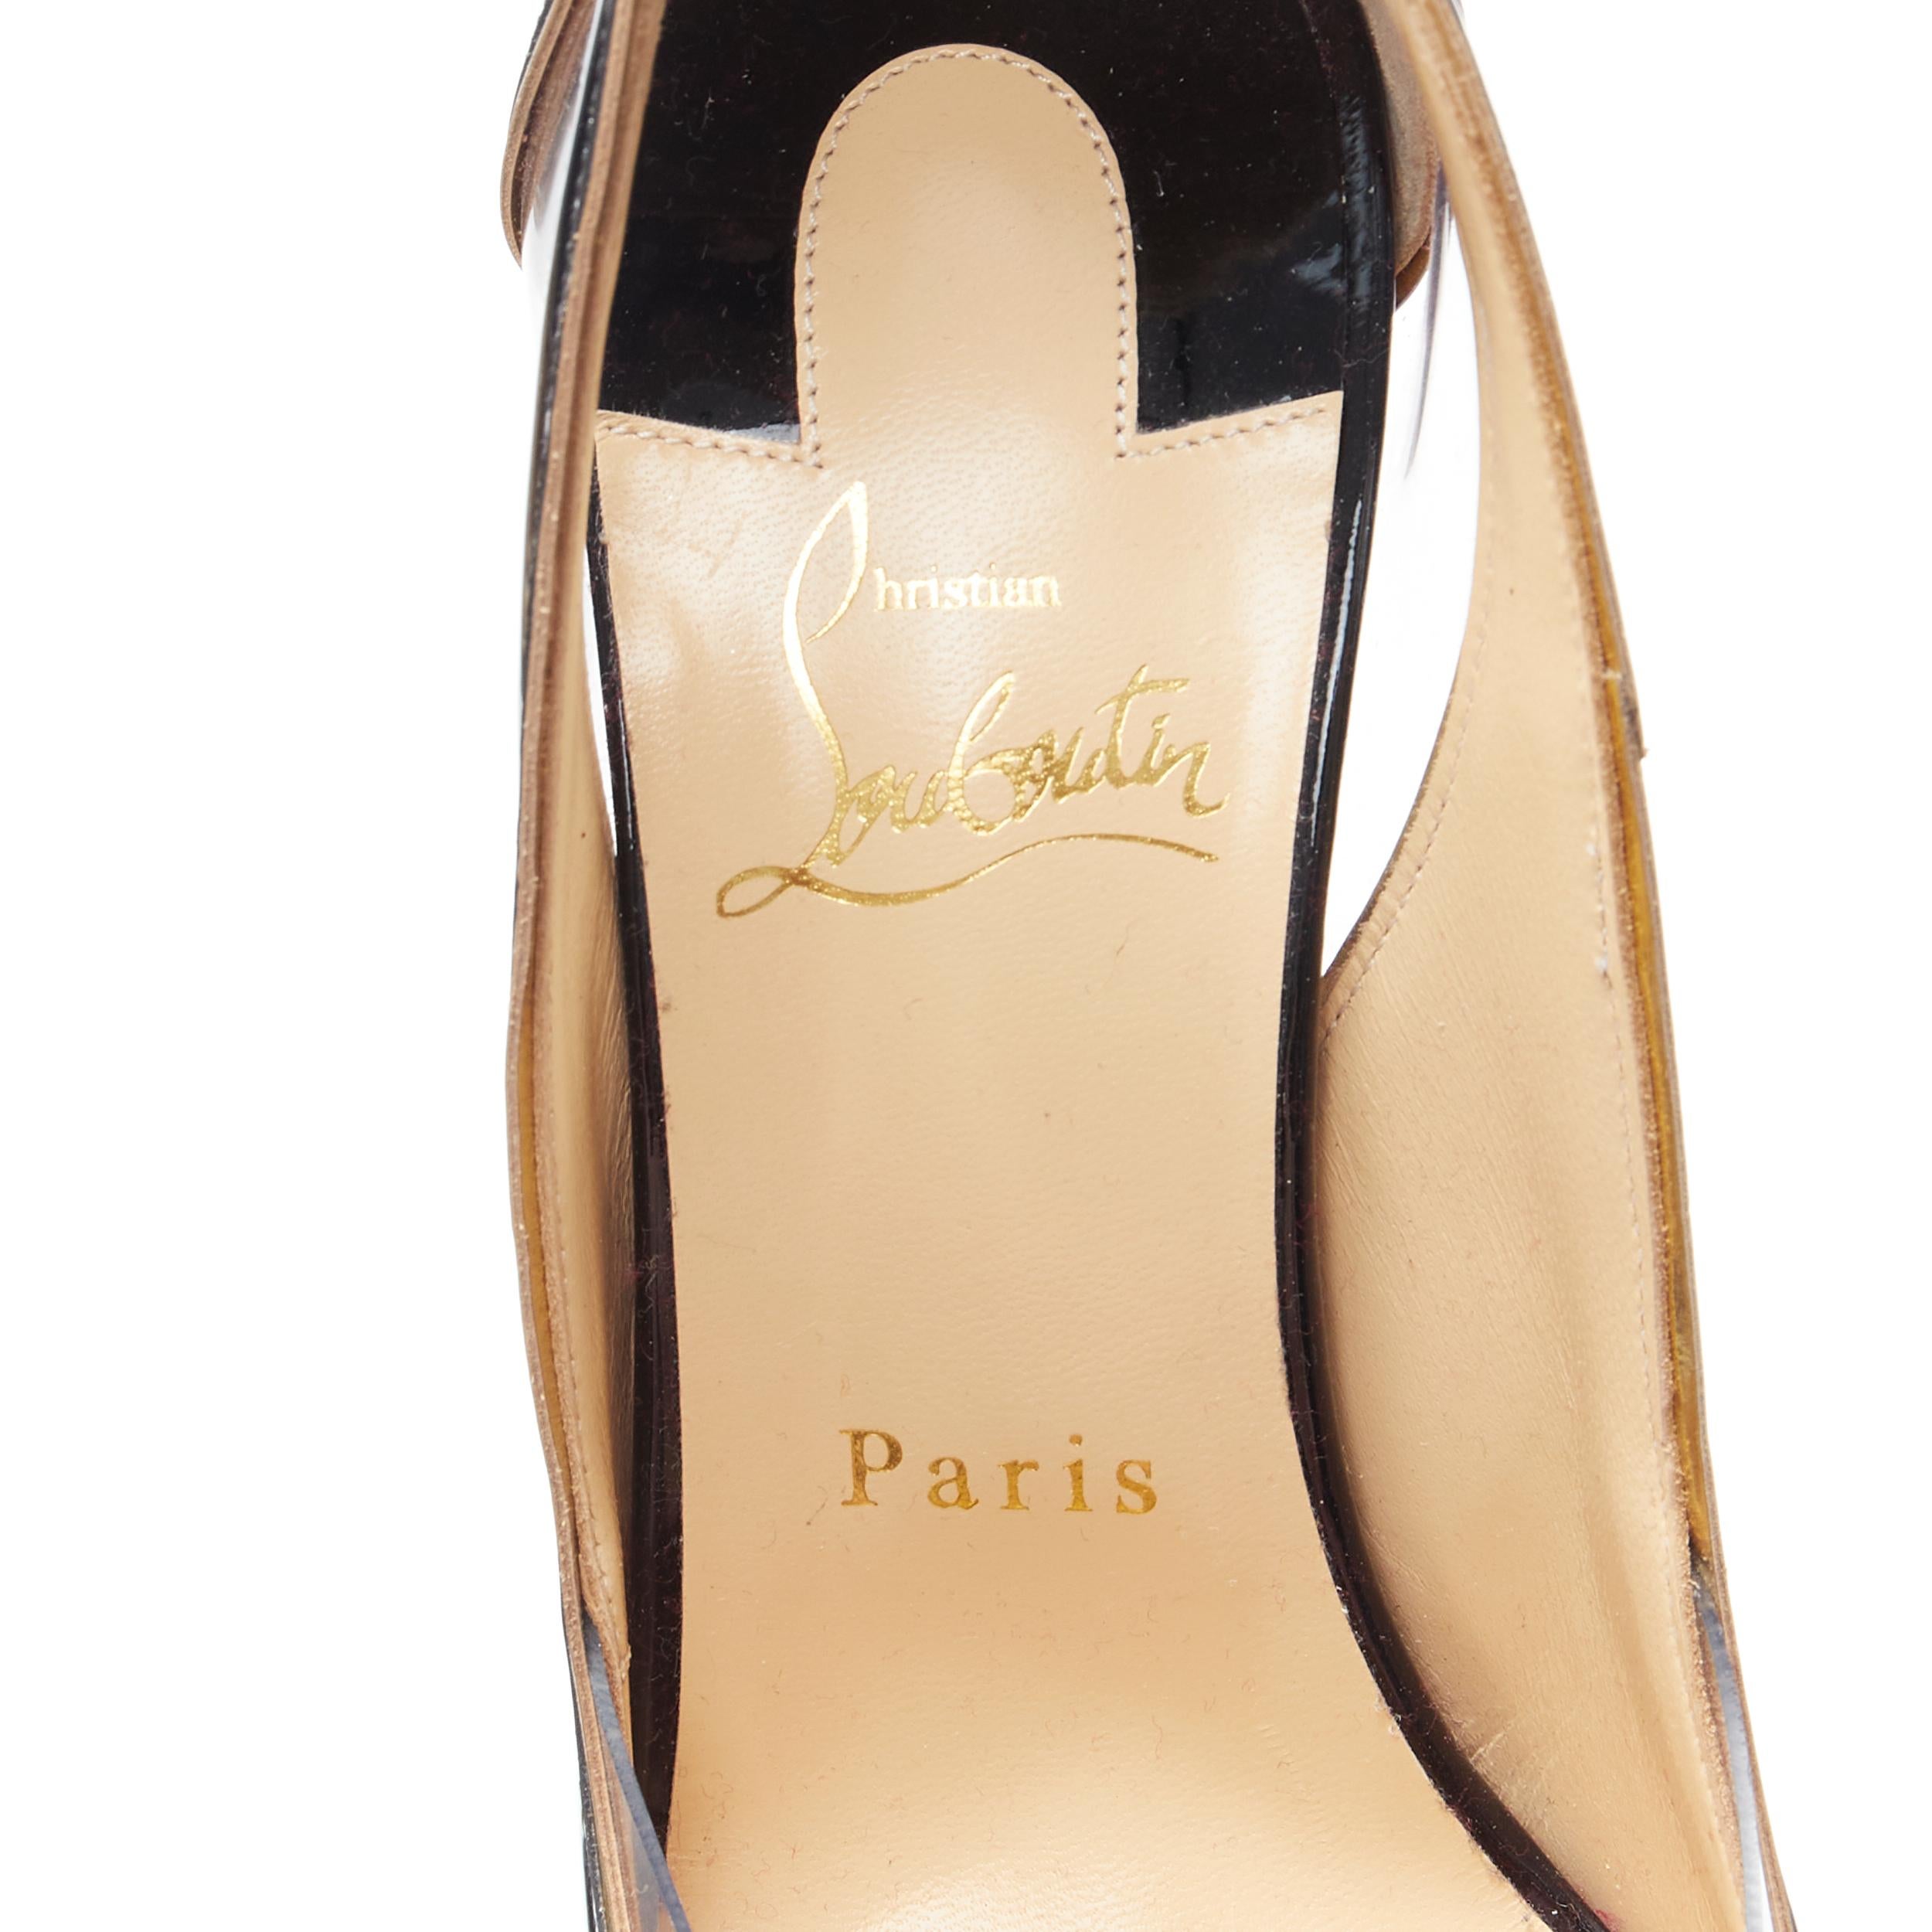 new CHRISTIAN LOUBOUTIN Cosmo 554 black patent gold PVC trimmed Pigalle EU37.5 5